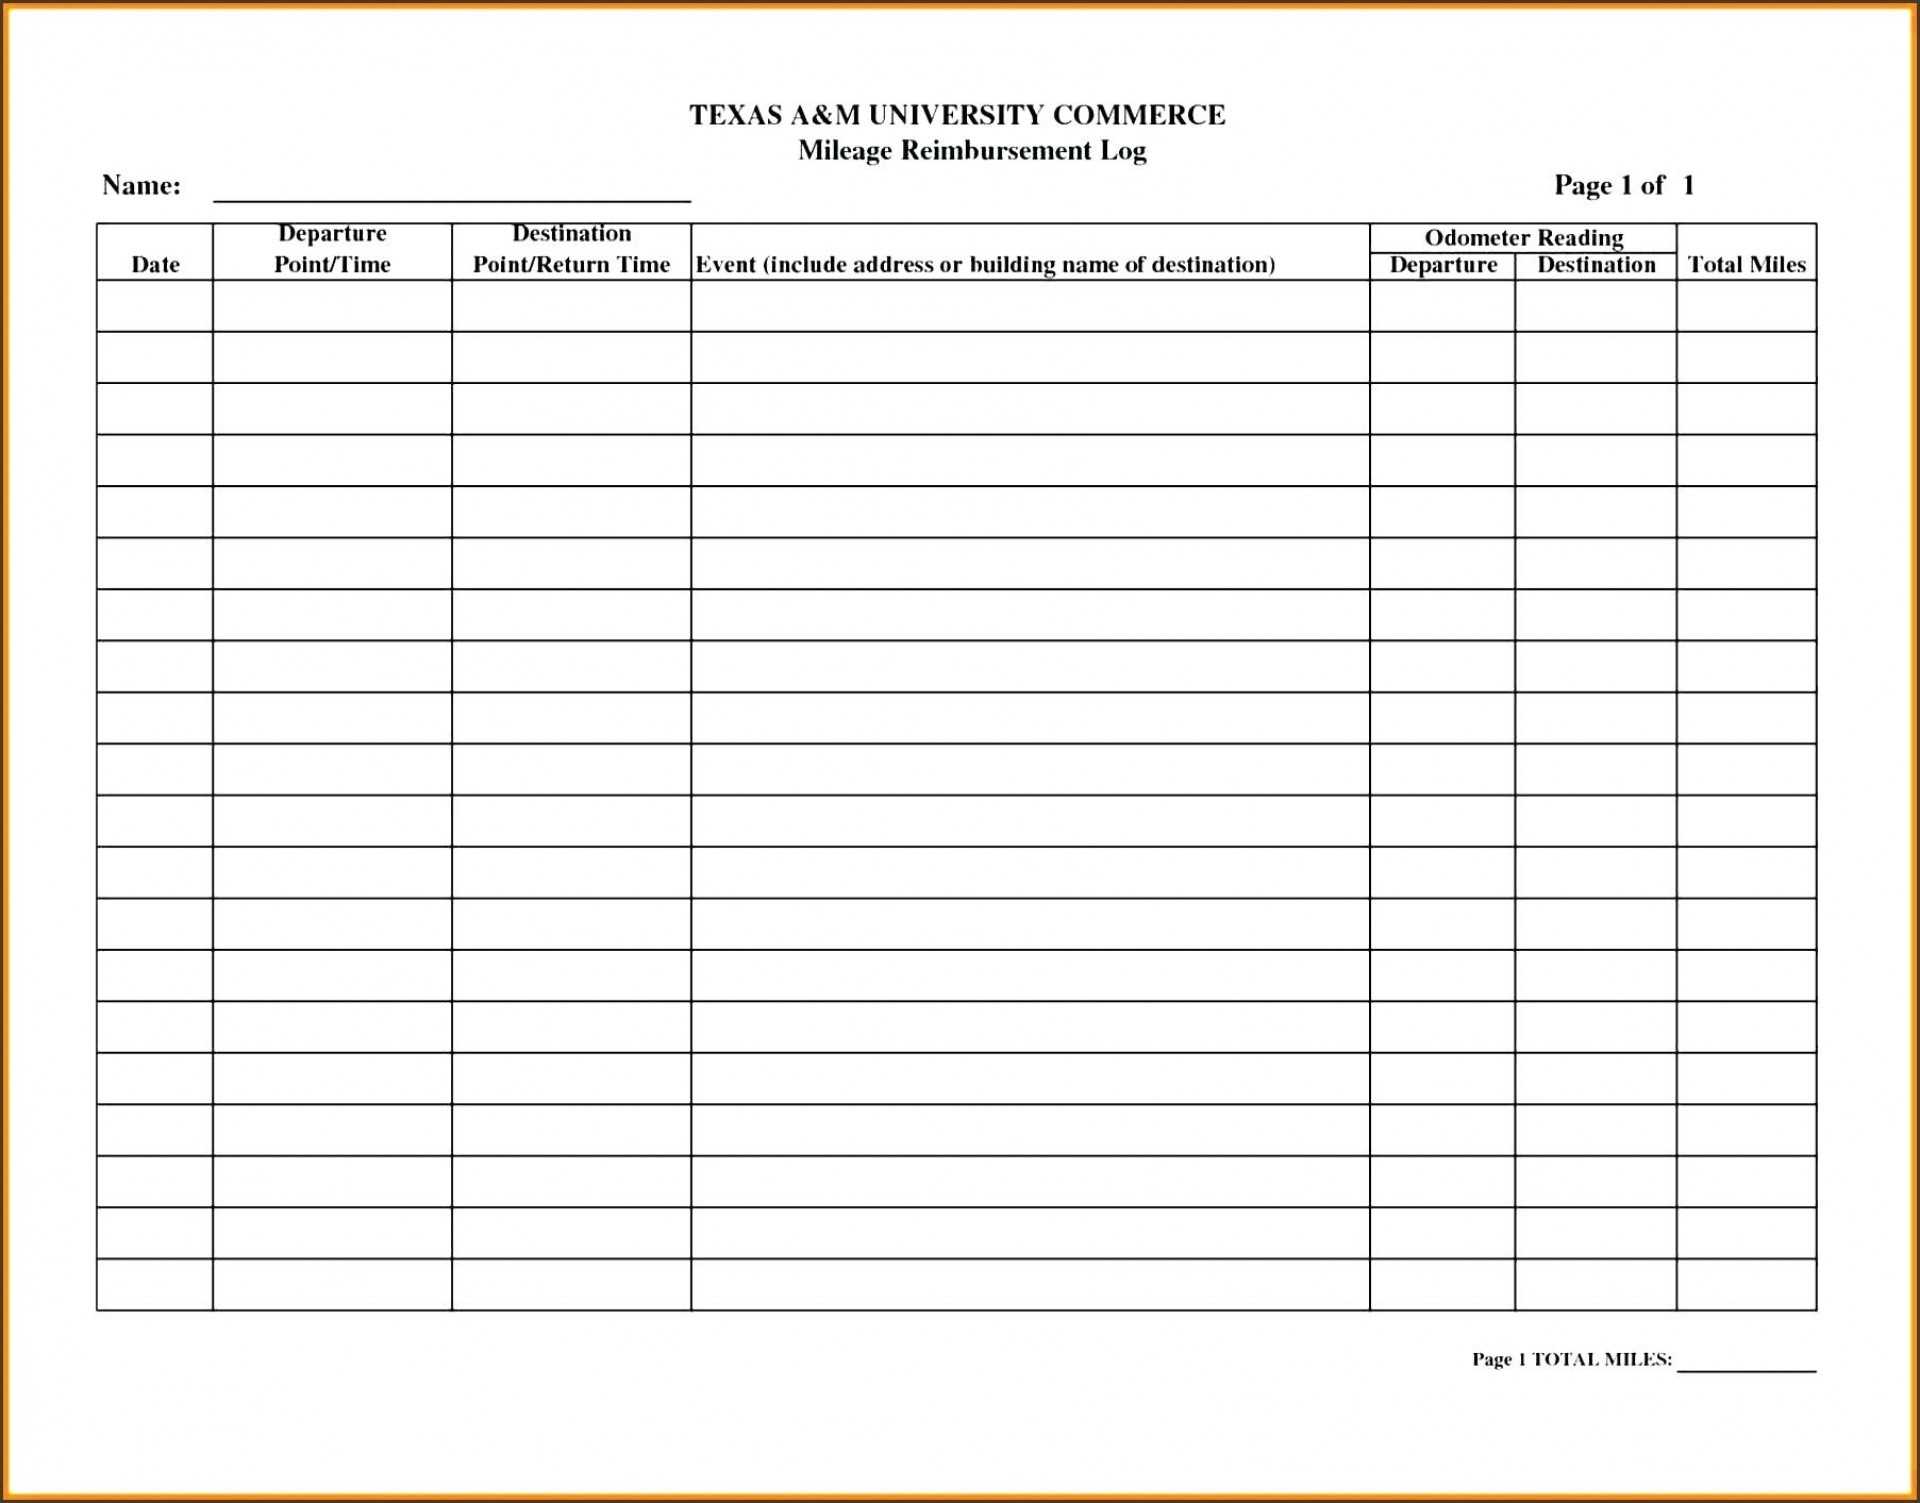 035 Mileage Log Template Excel Large Best Ideas Tracker Form Throughout Mileage Report Template